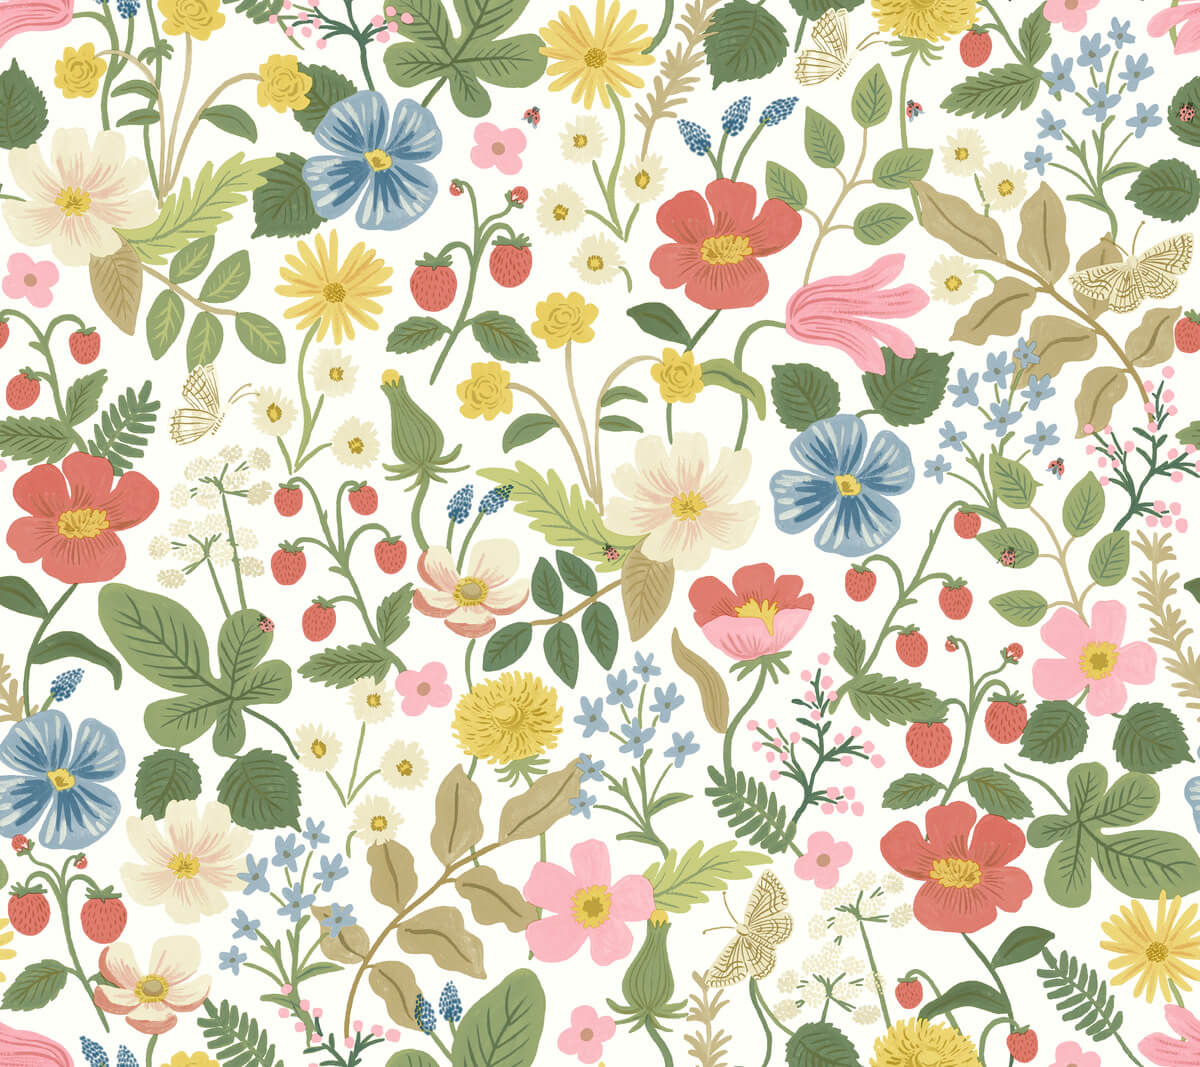 Rifle Paper Co. Second Edition Strawberry Fields Wallpaper